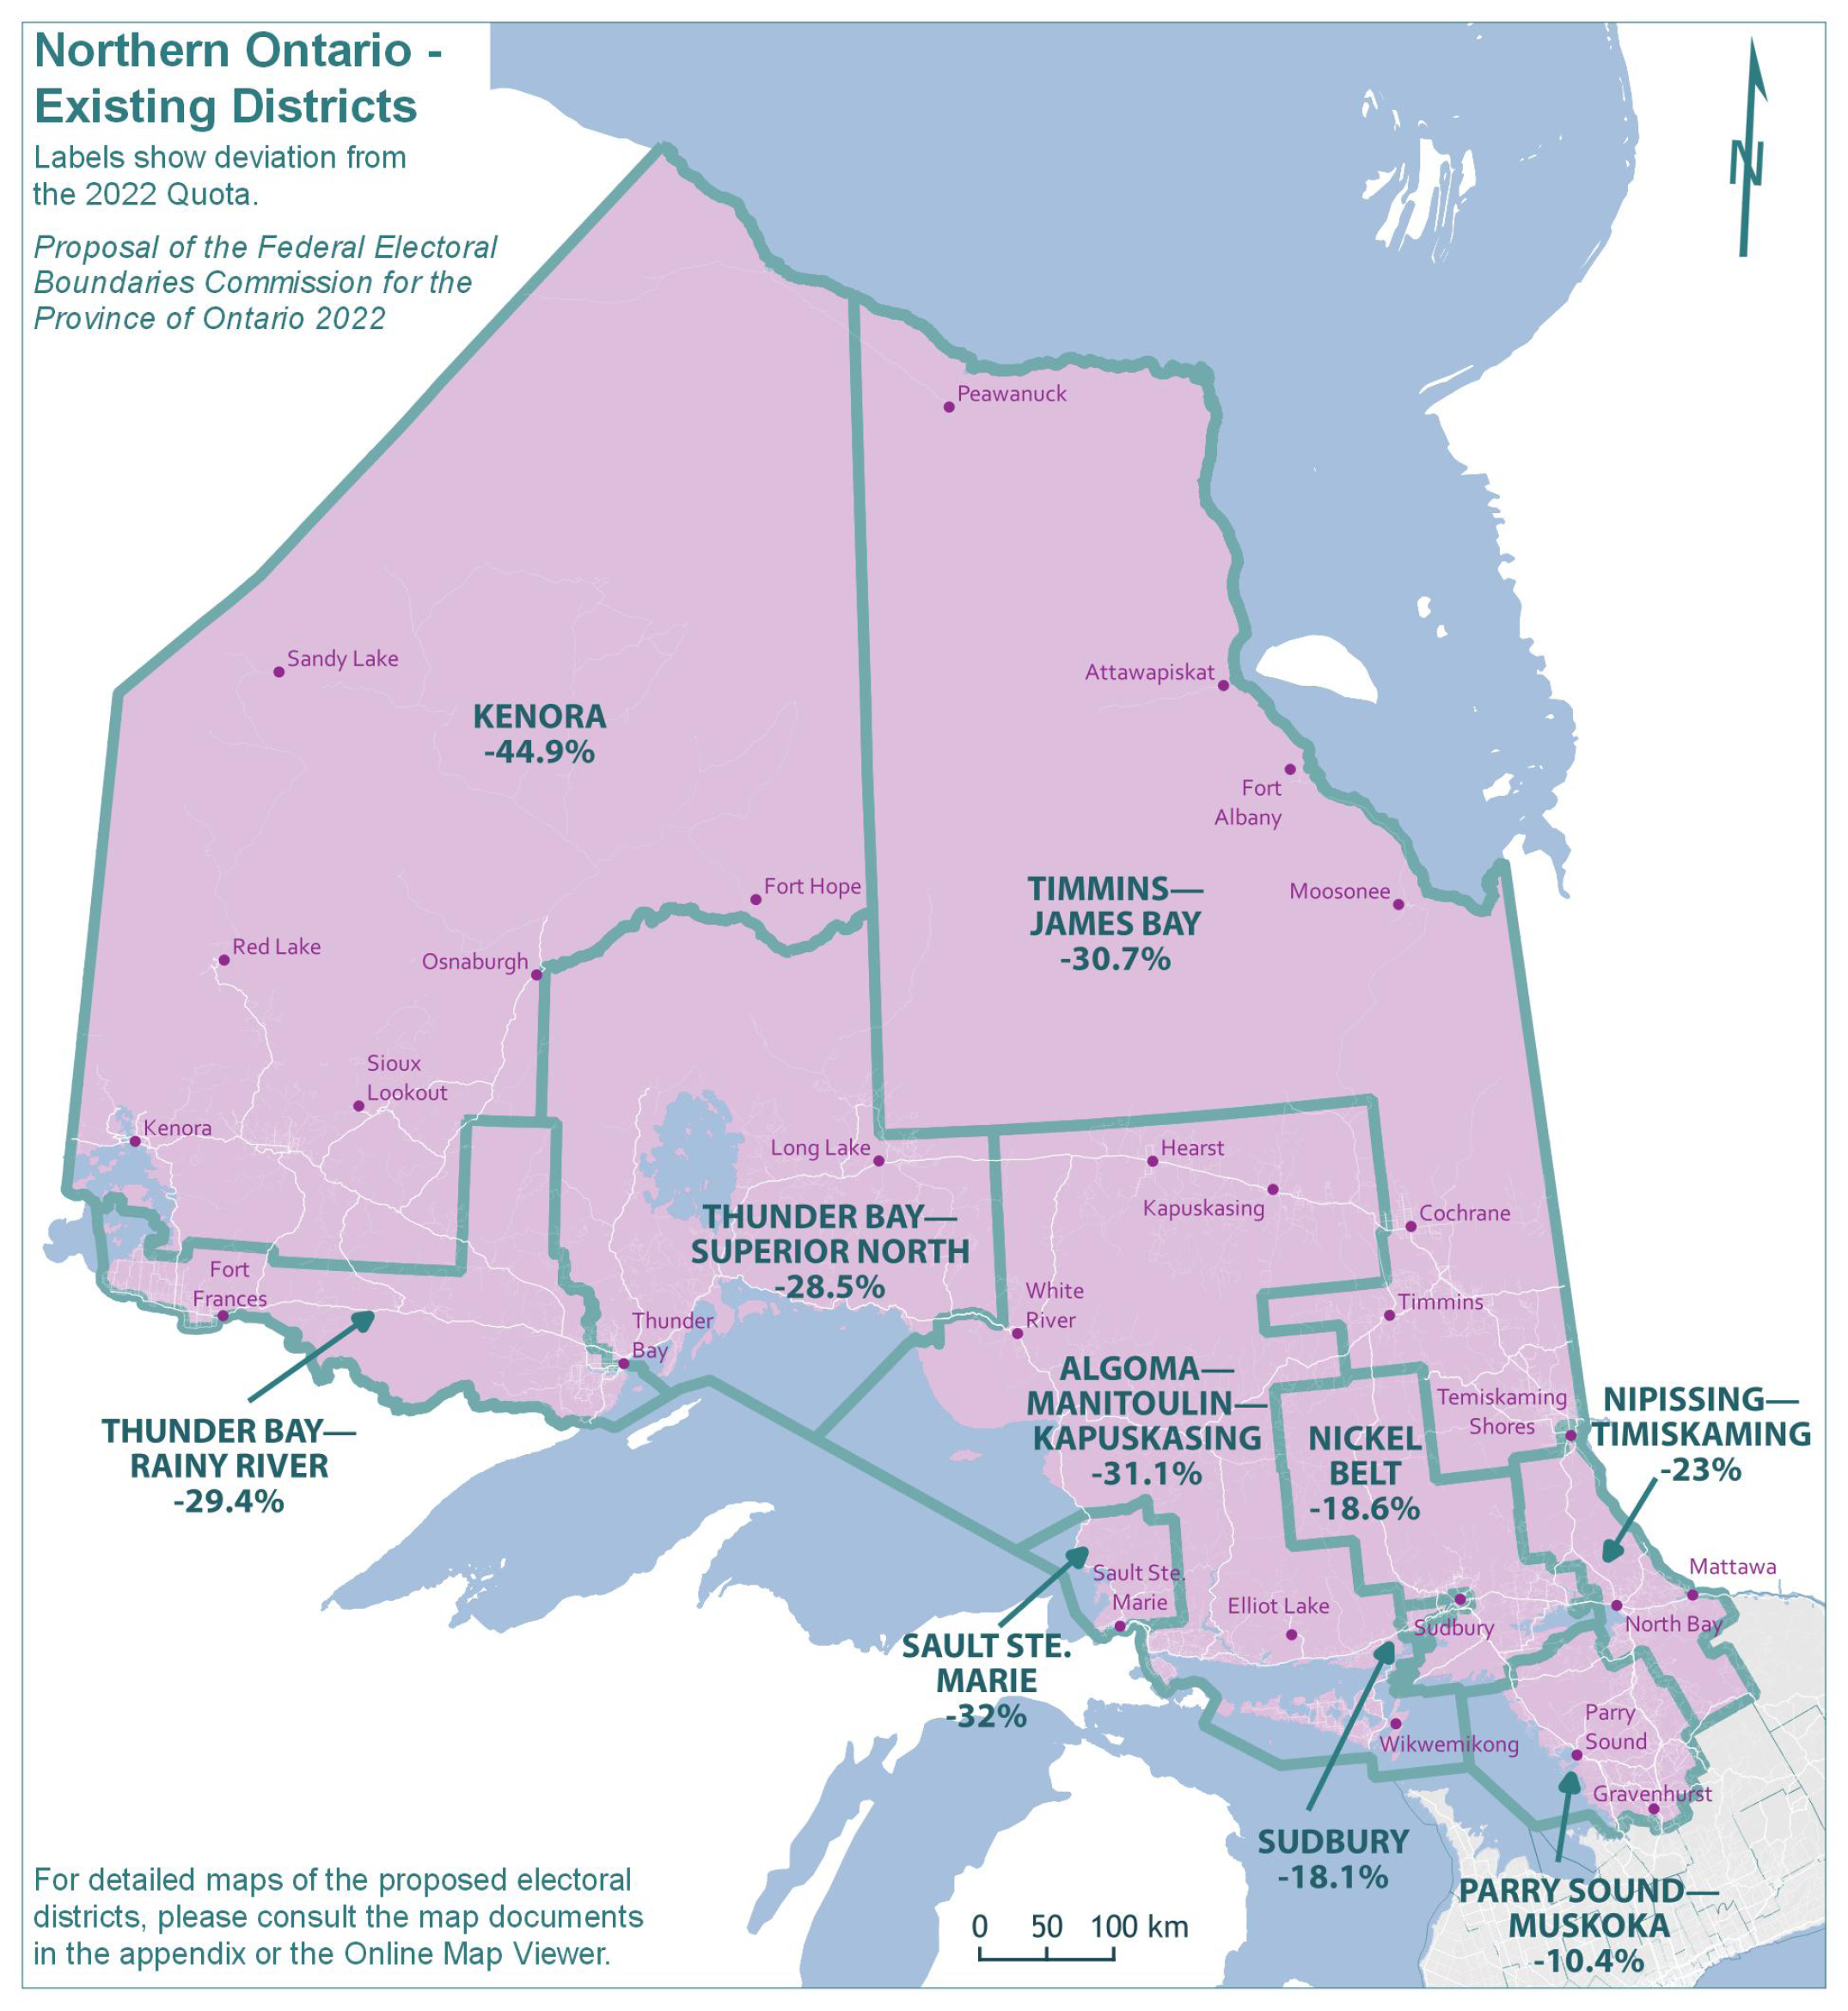 Northern Ontario - Existing Districts